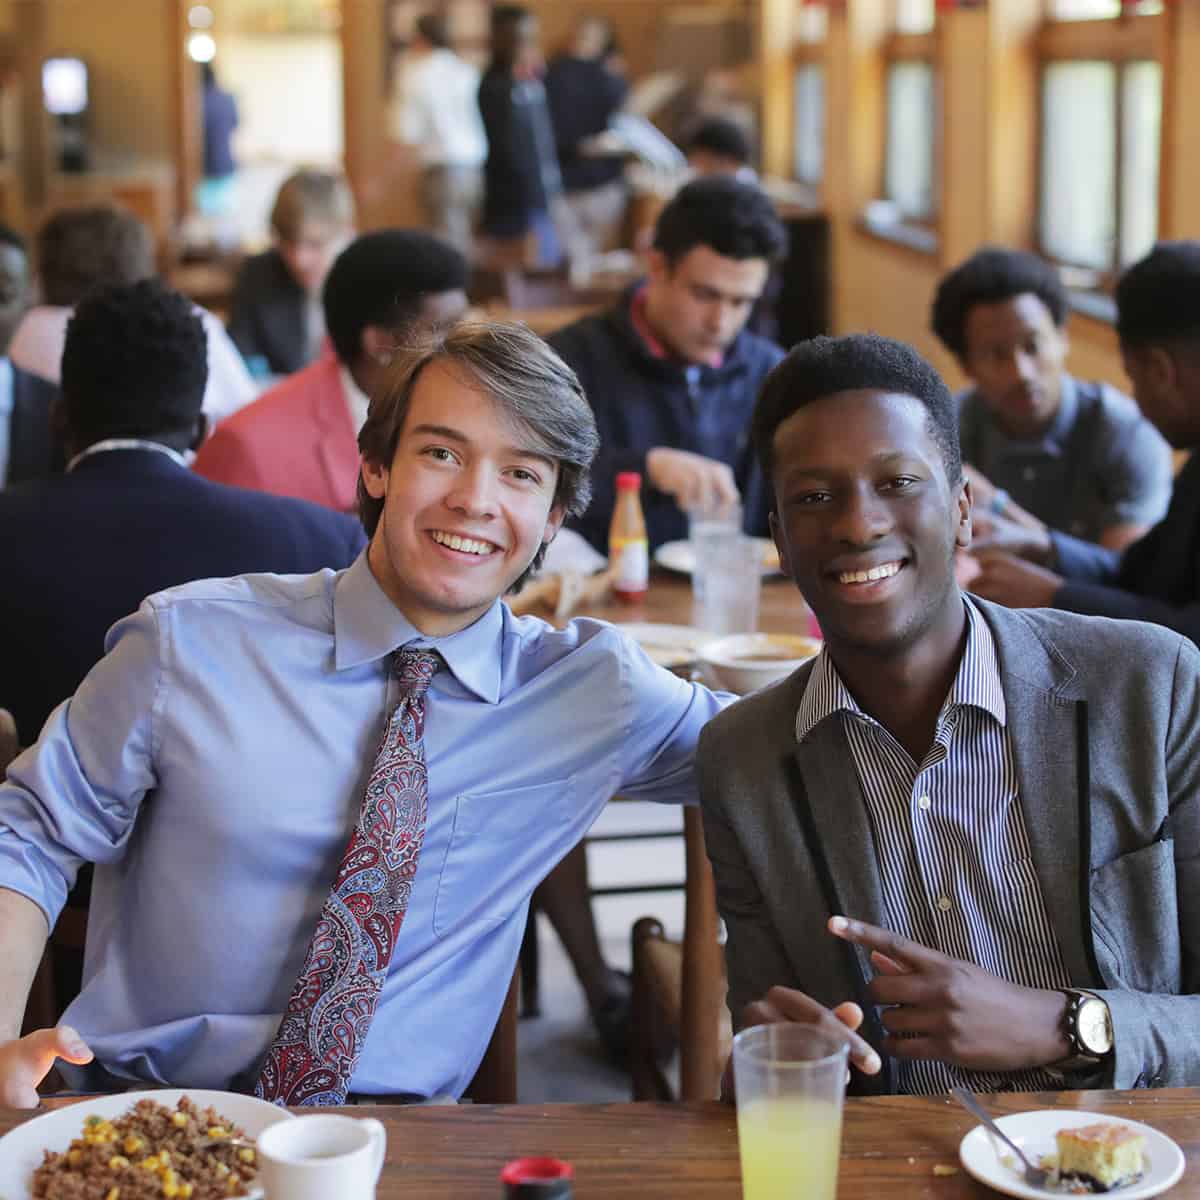 Students smiling in the dining hall.